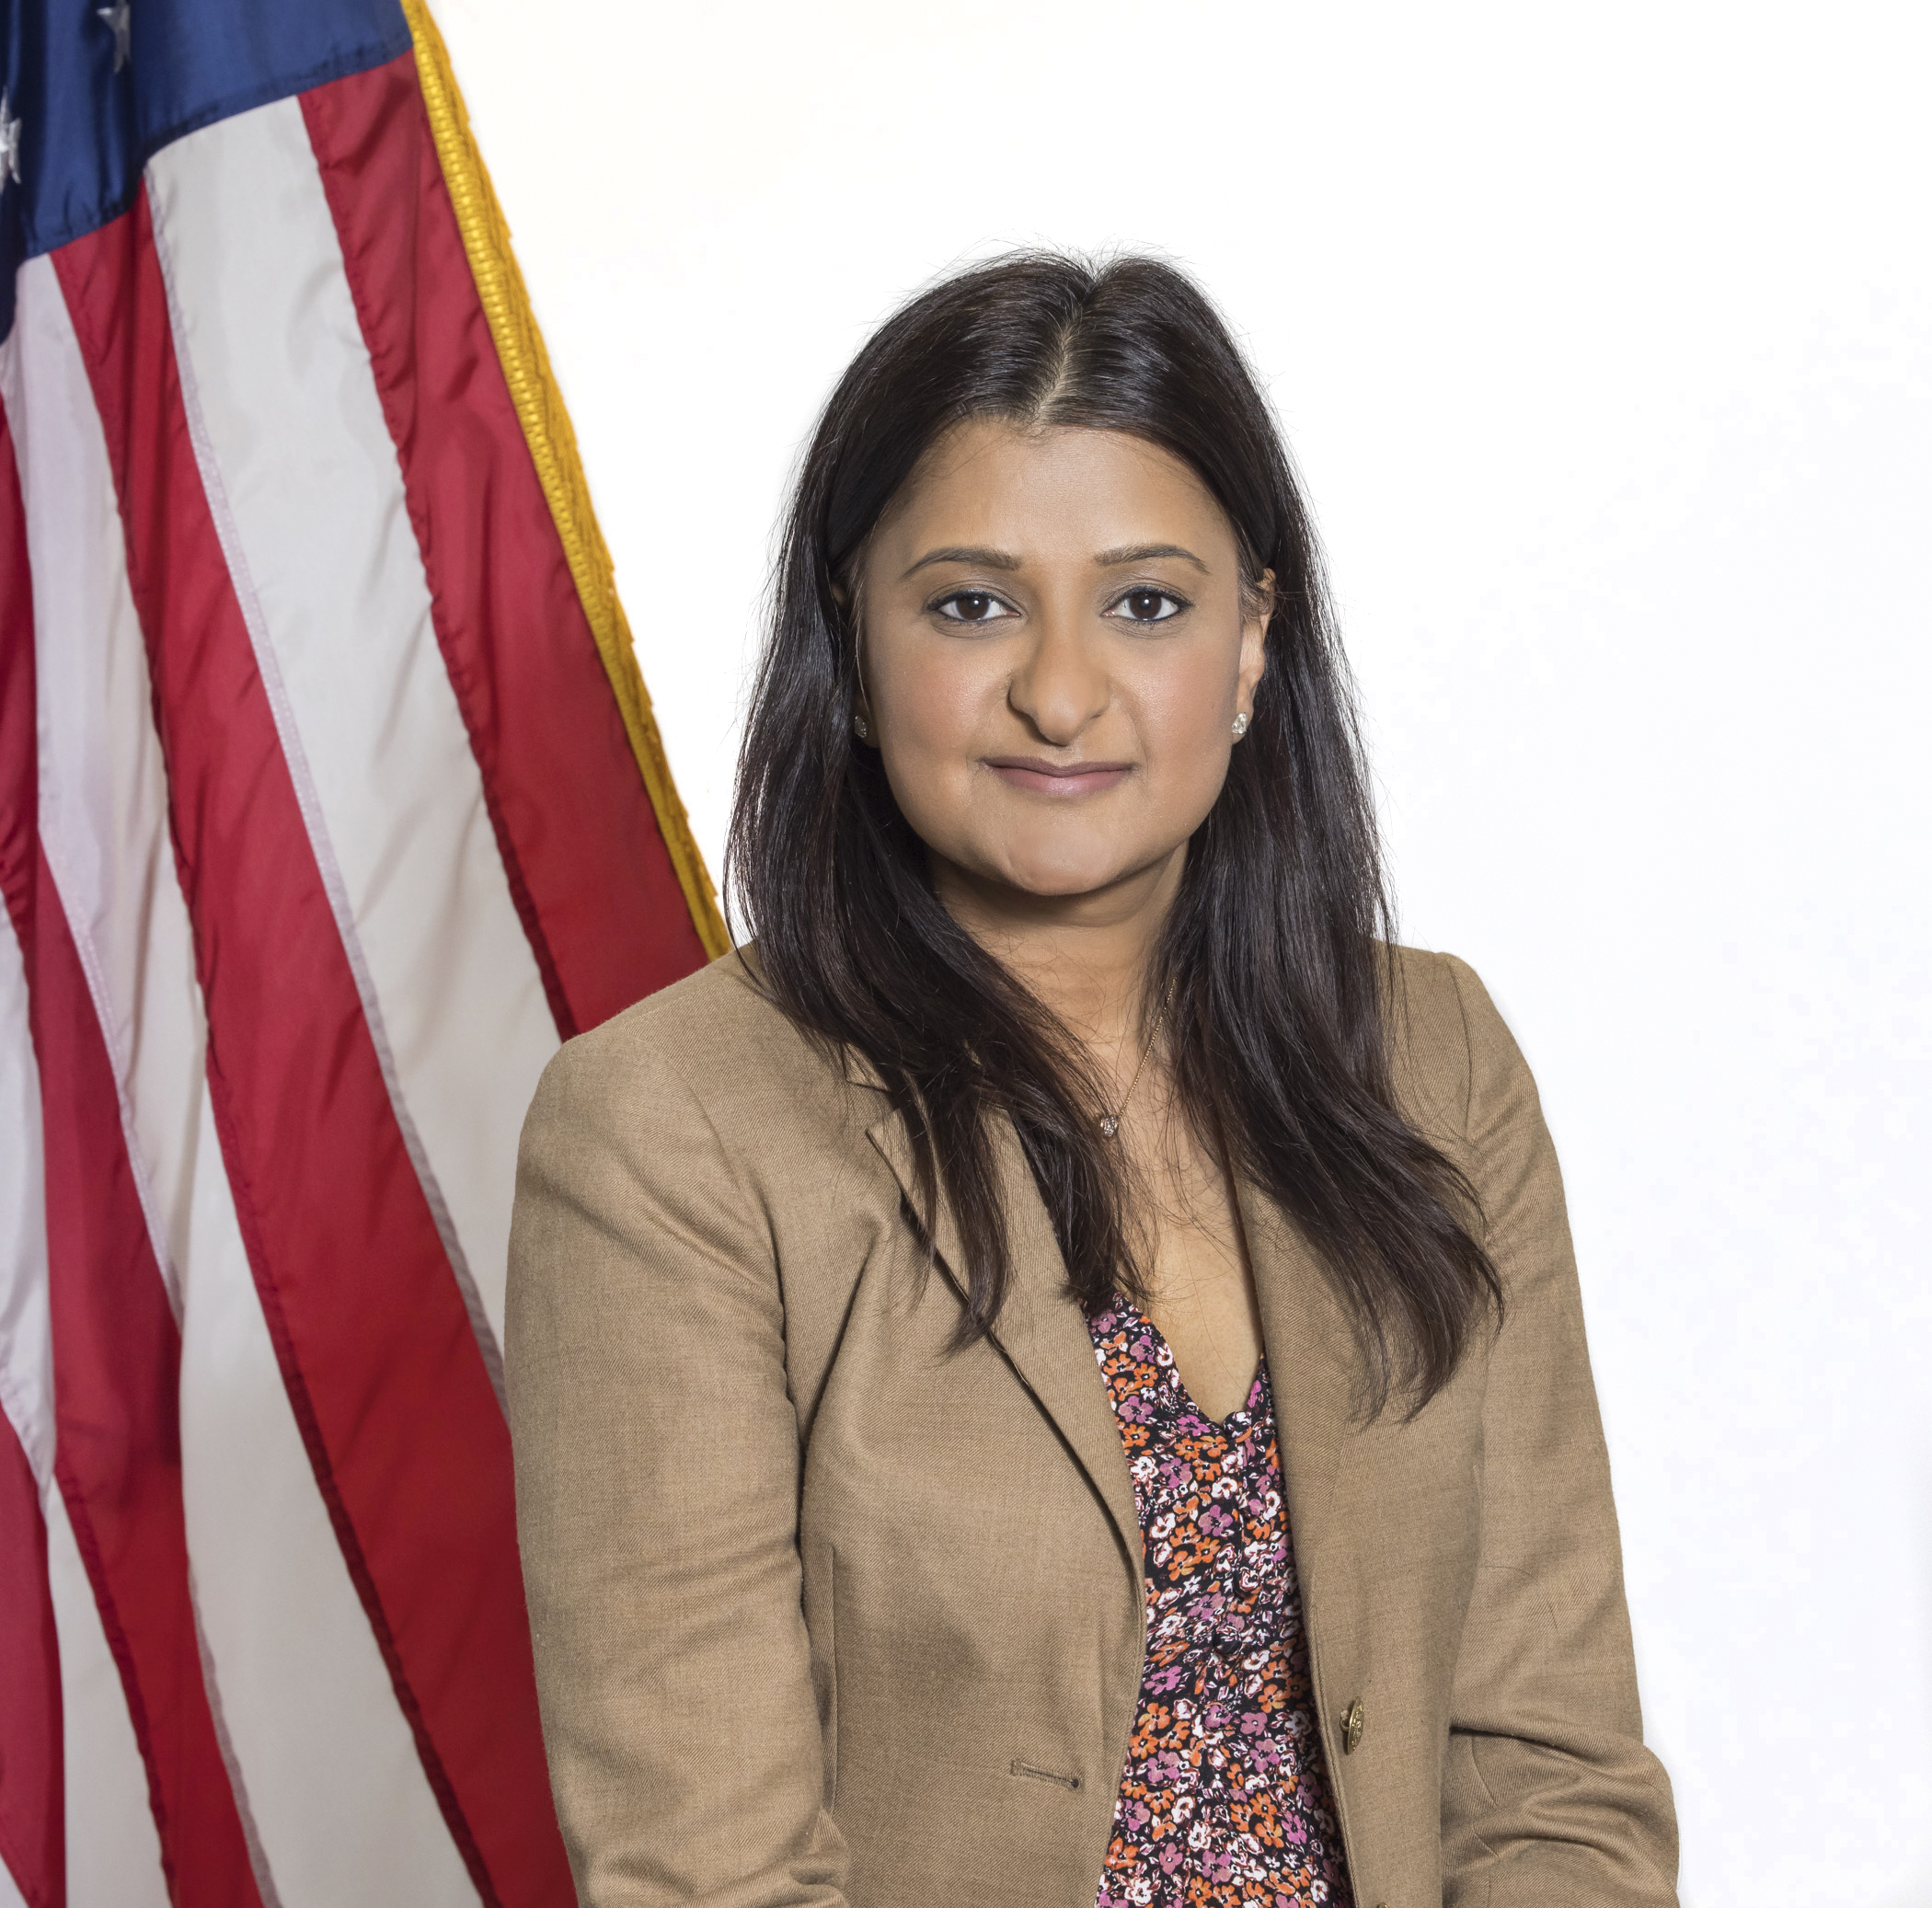 Director of Personnel, Planning and Budget Manisha Tibrewal